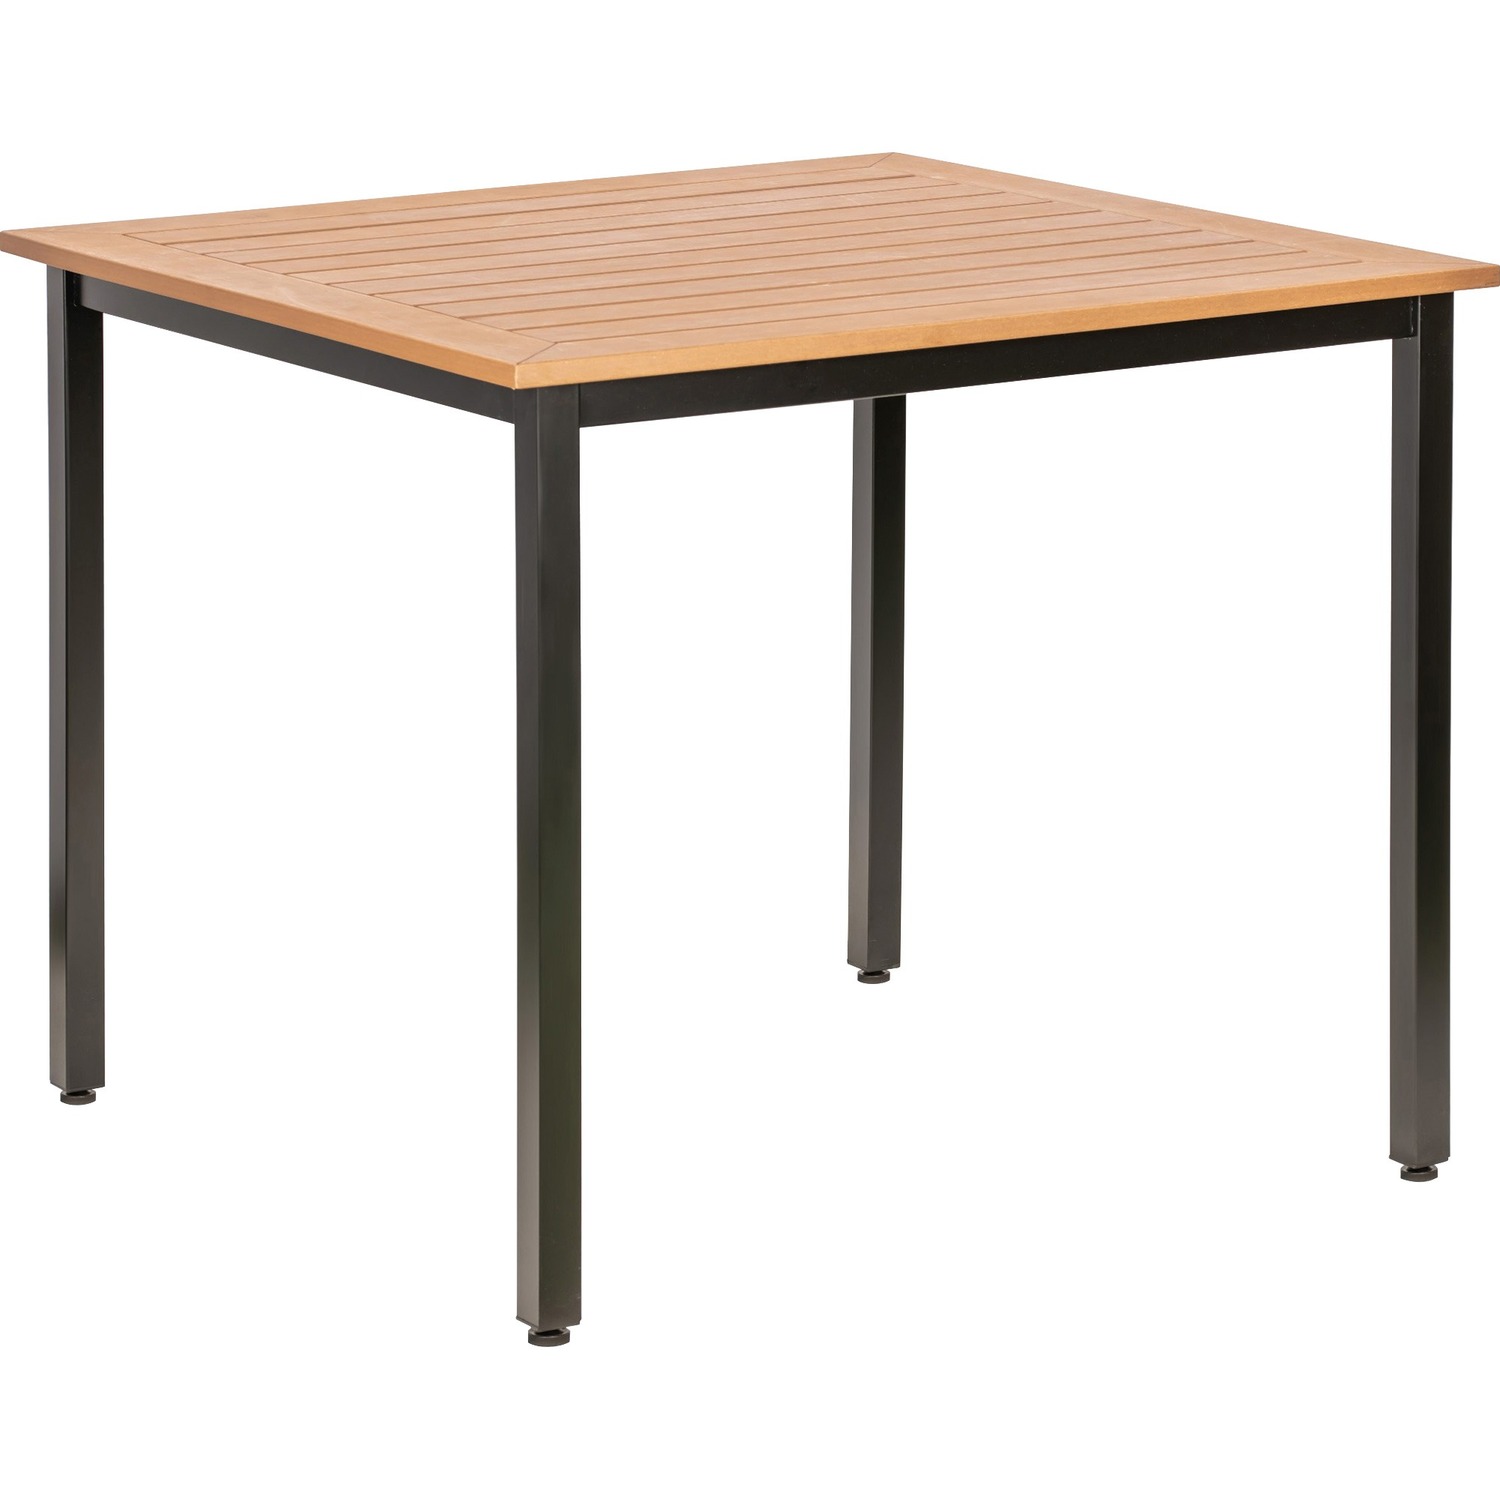 Lorell, Teak Outdoor Table, 1 Each - image 1 of 4